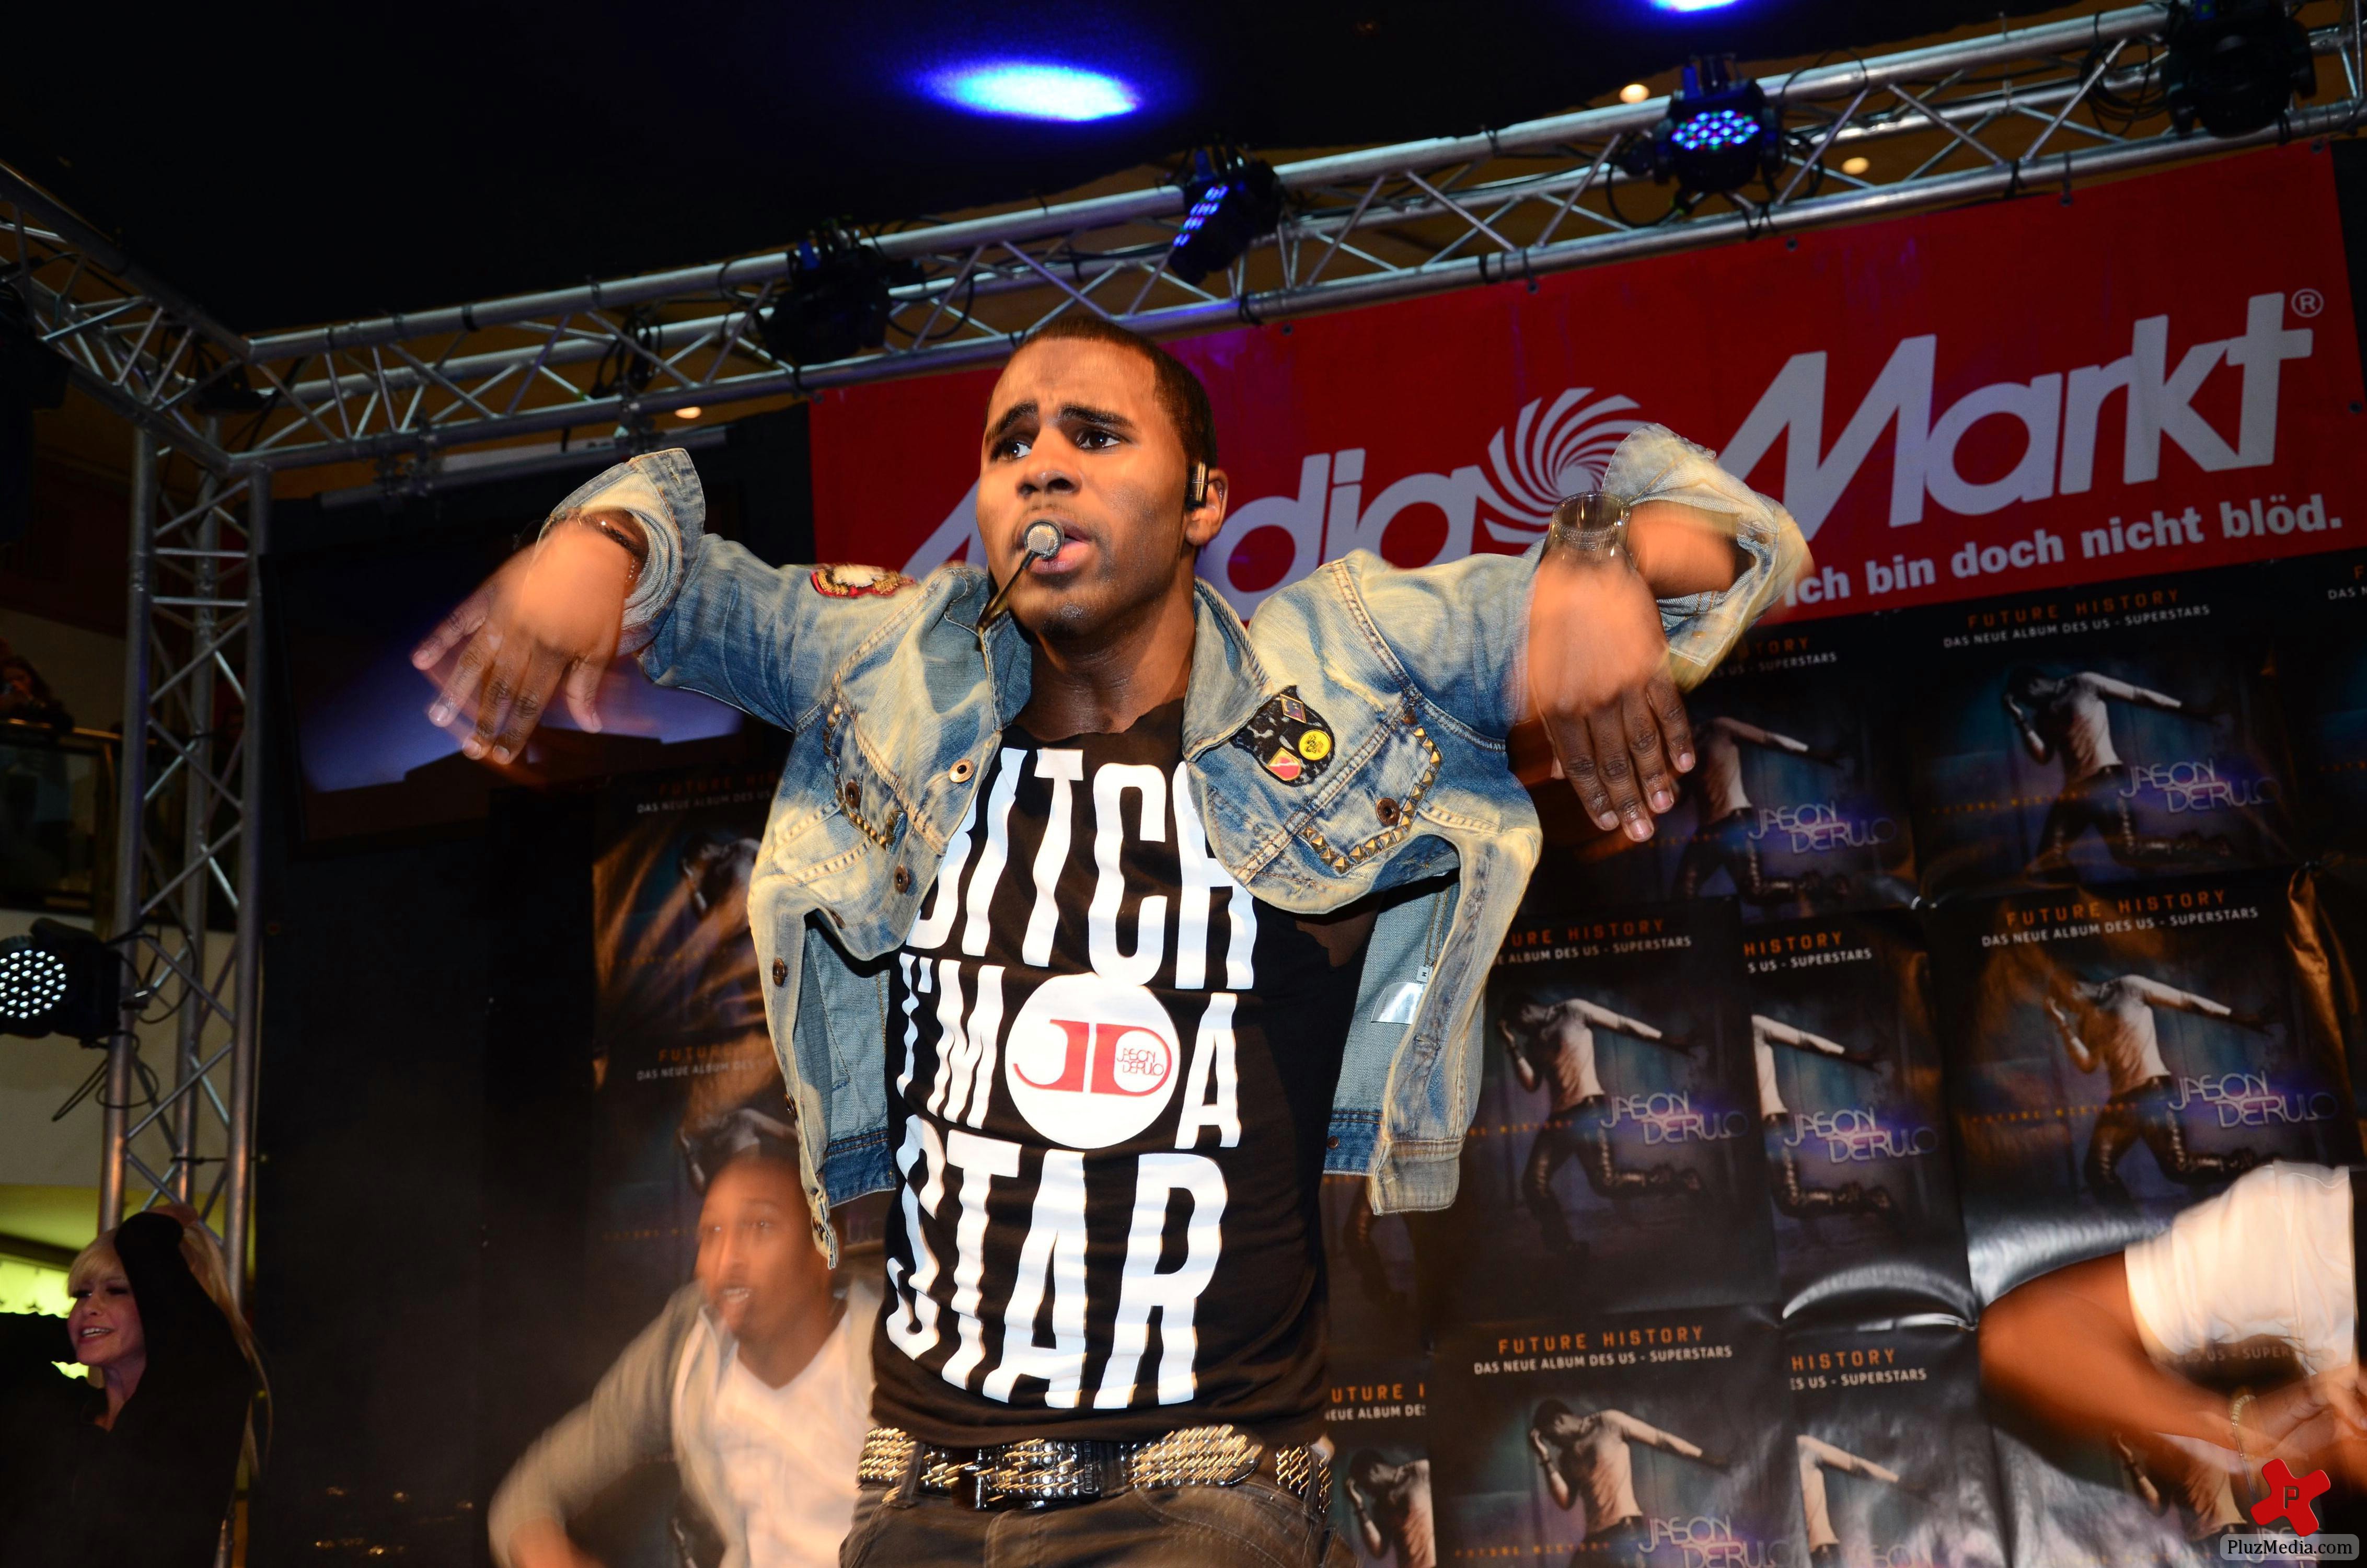 Jason Derulo performing live at Alexa mall photos | Picture 79694